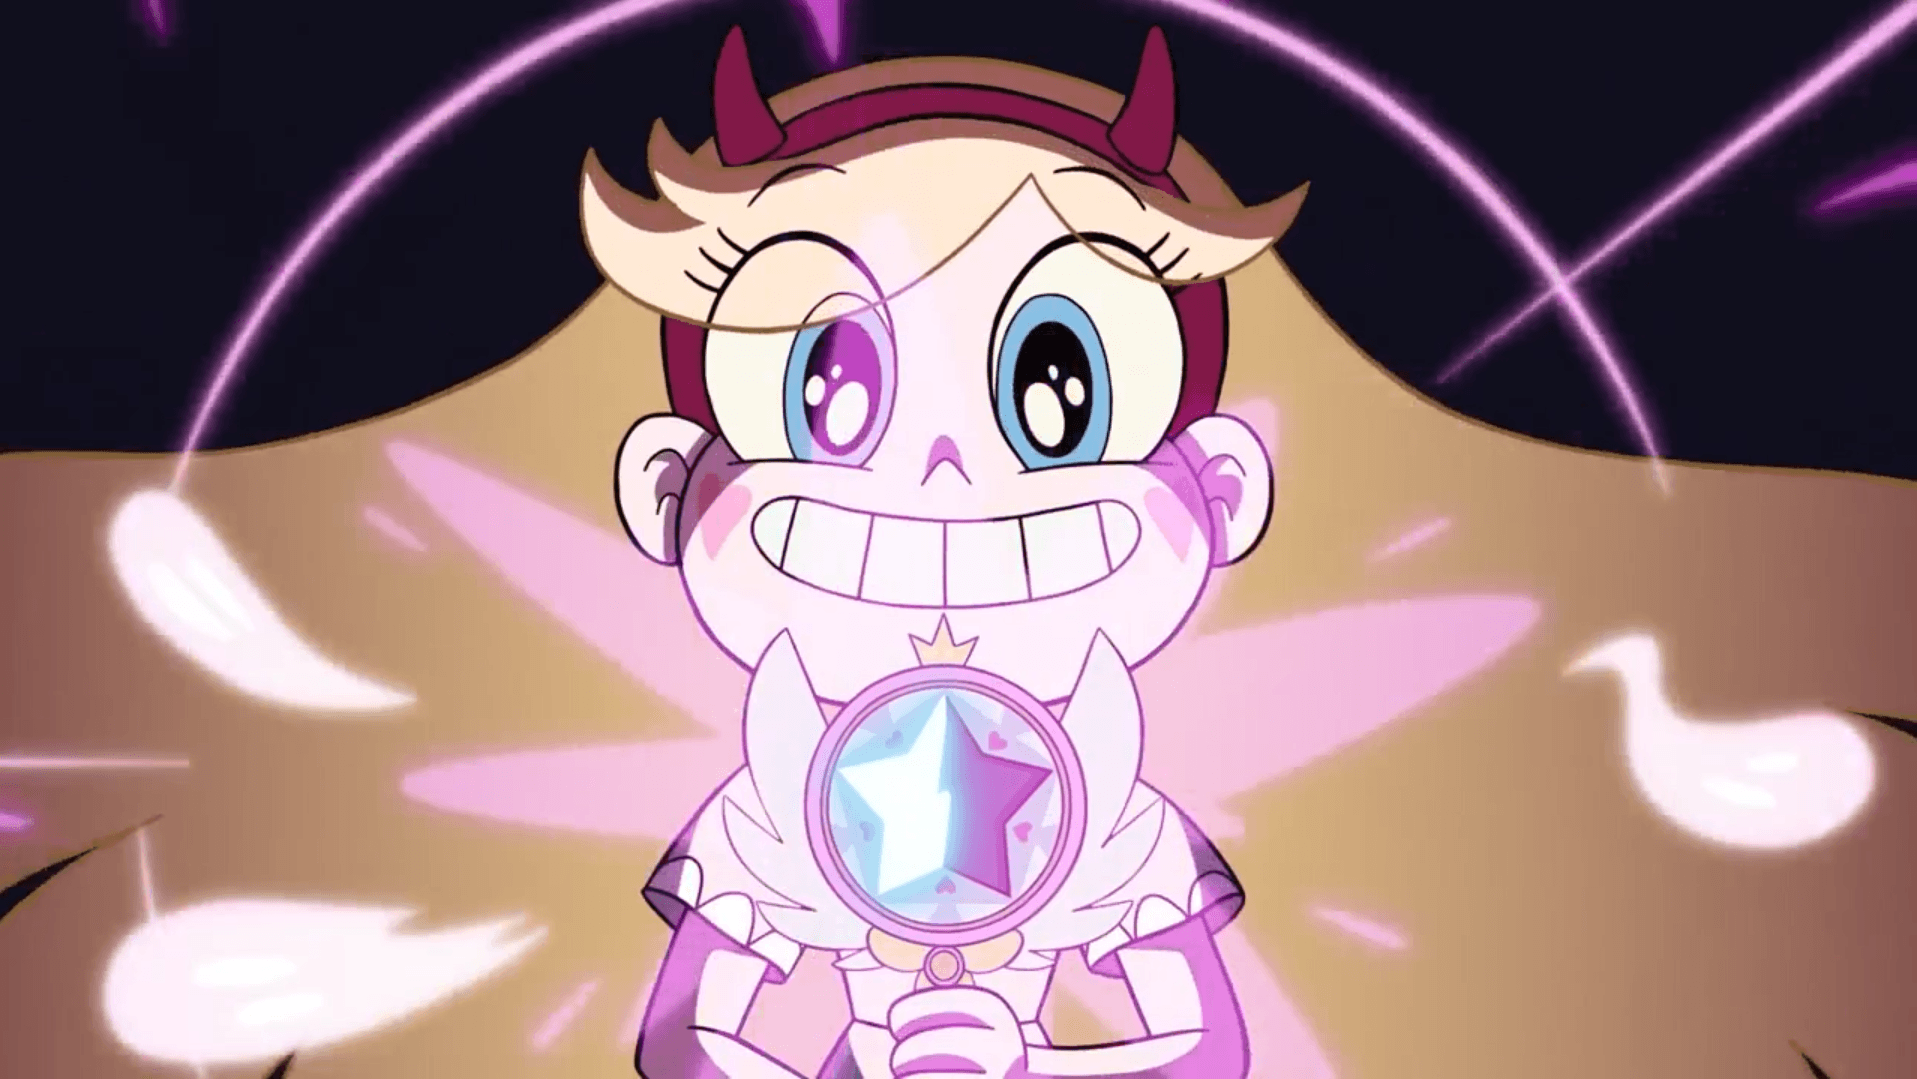 Star Vs The Forces Of Evil Wallpaper Post Cleaved Spoilers After